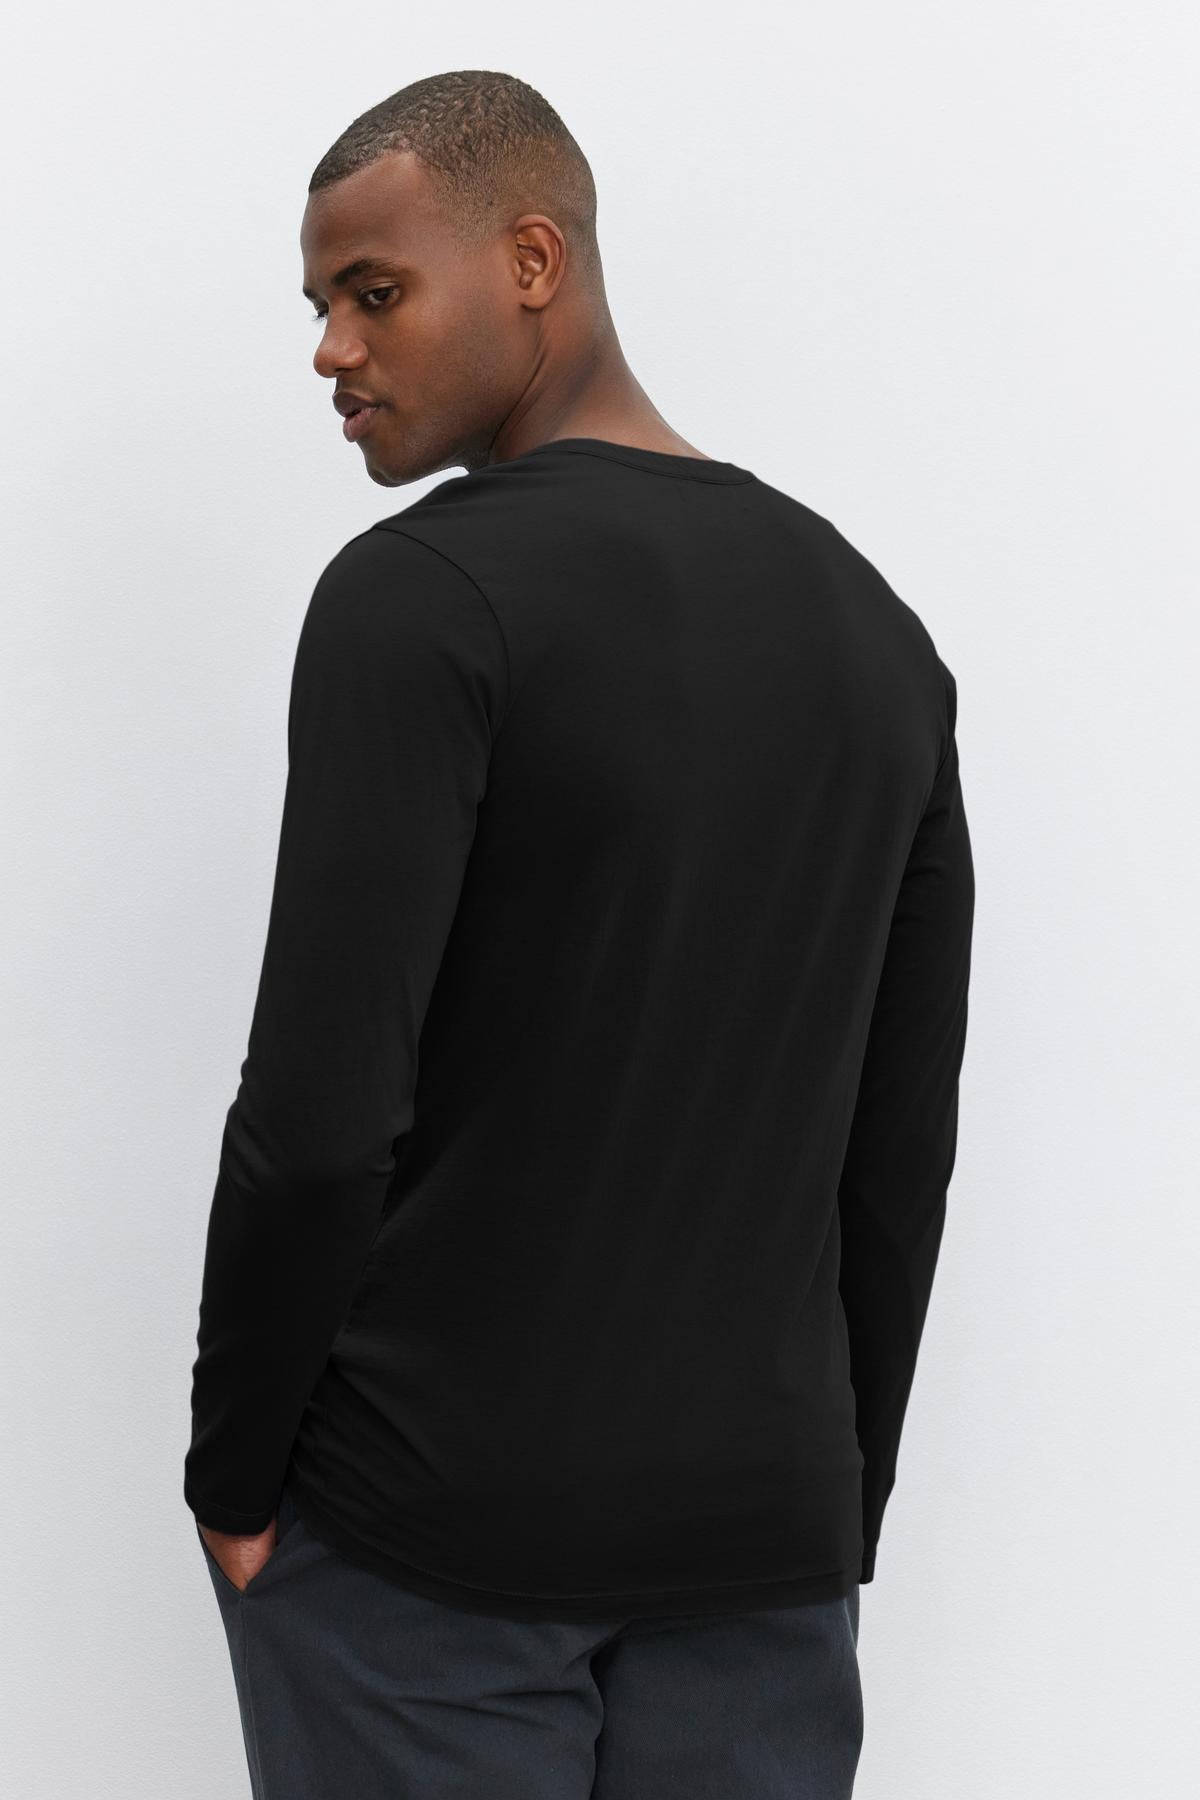 A person with short hair is standing and looking over their shoulder. They are wearing a long-sleeve black ALVARO HENLEY by Velvet by Graham & Spencer and dark pants against a plain white background.-36273890427073